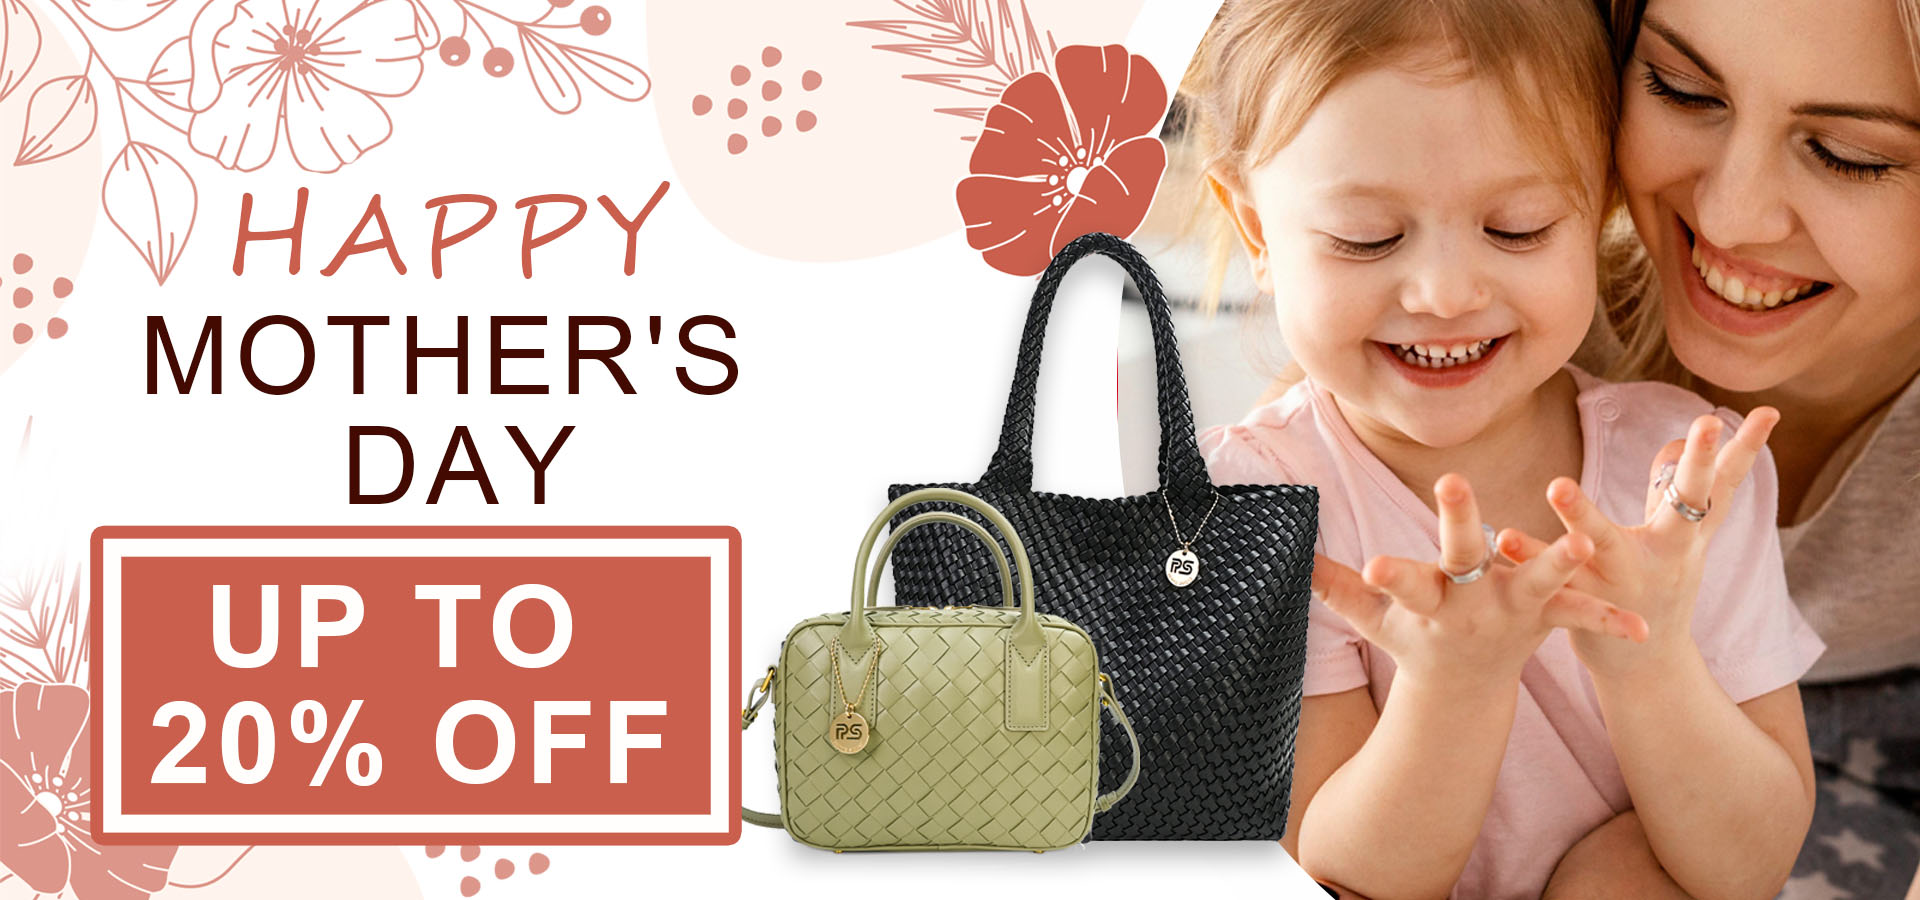 Mother's Day Gifts Idea | PETITE SIMONE